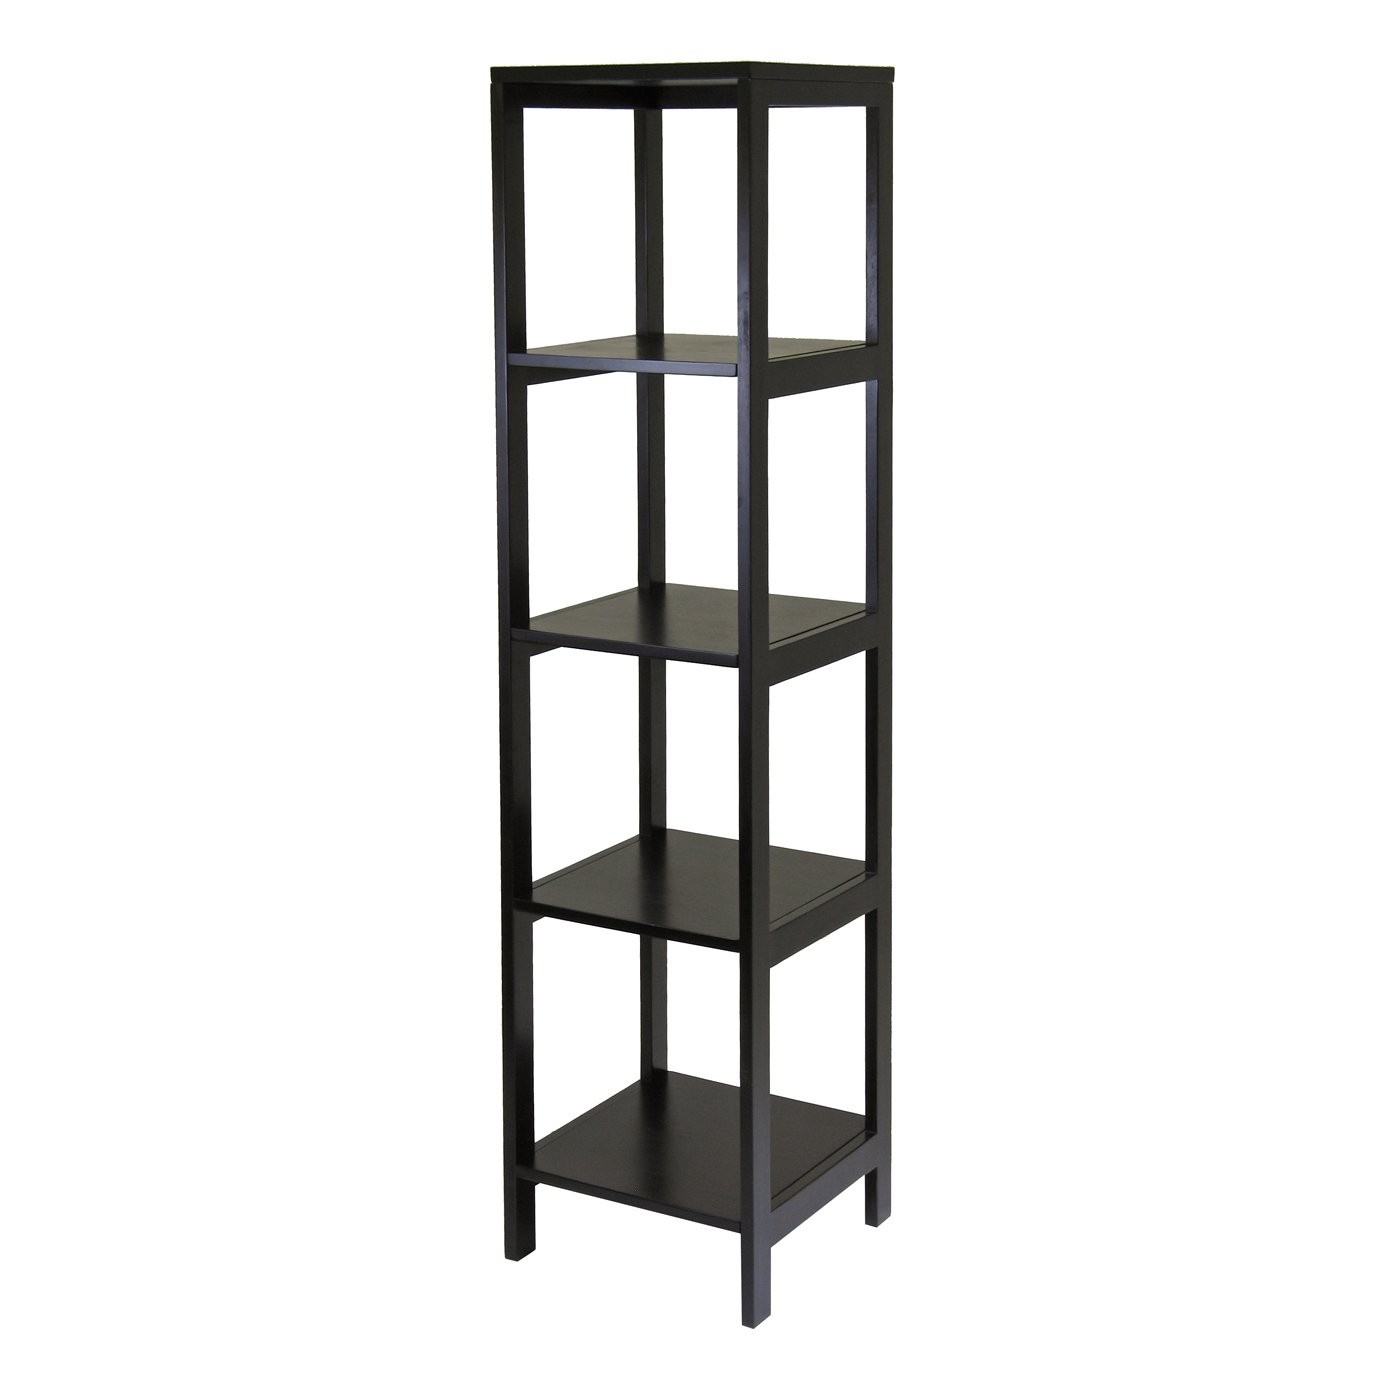 Winsome Wood 92615 Hailey Tower Shelf Bookcase